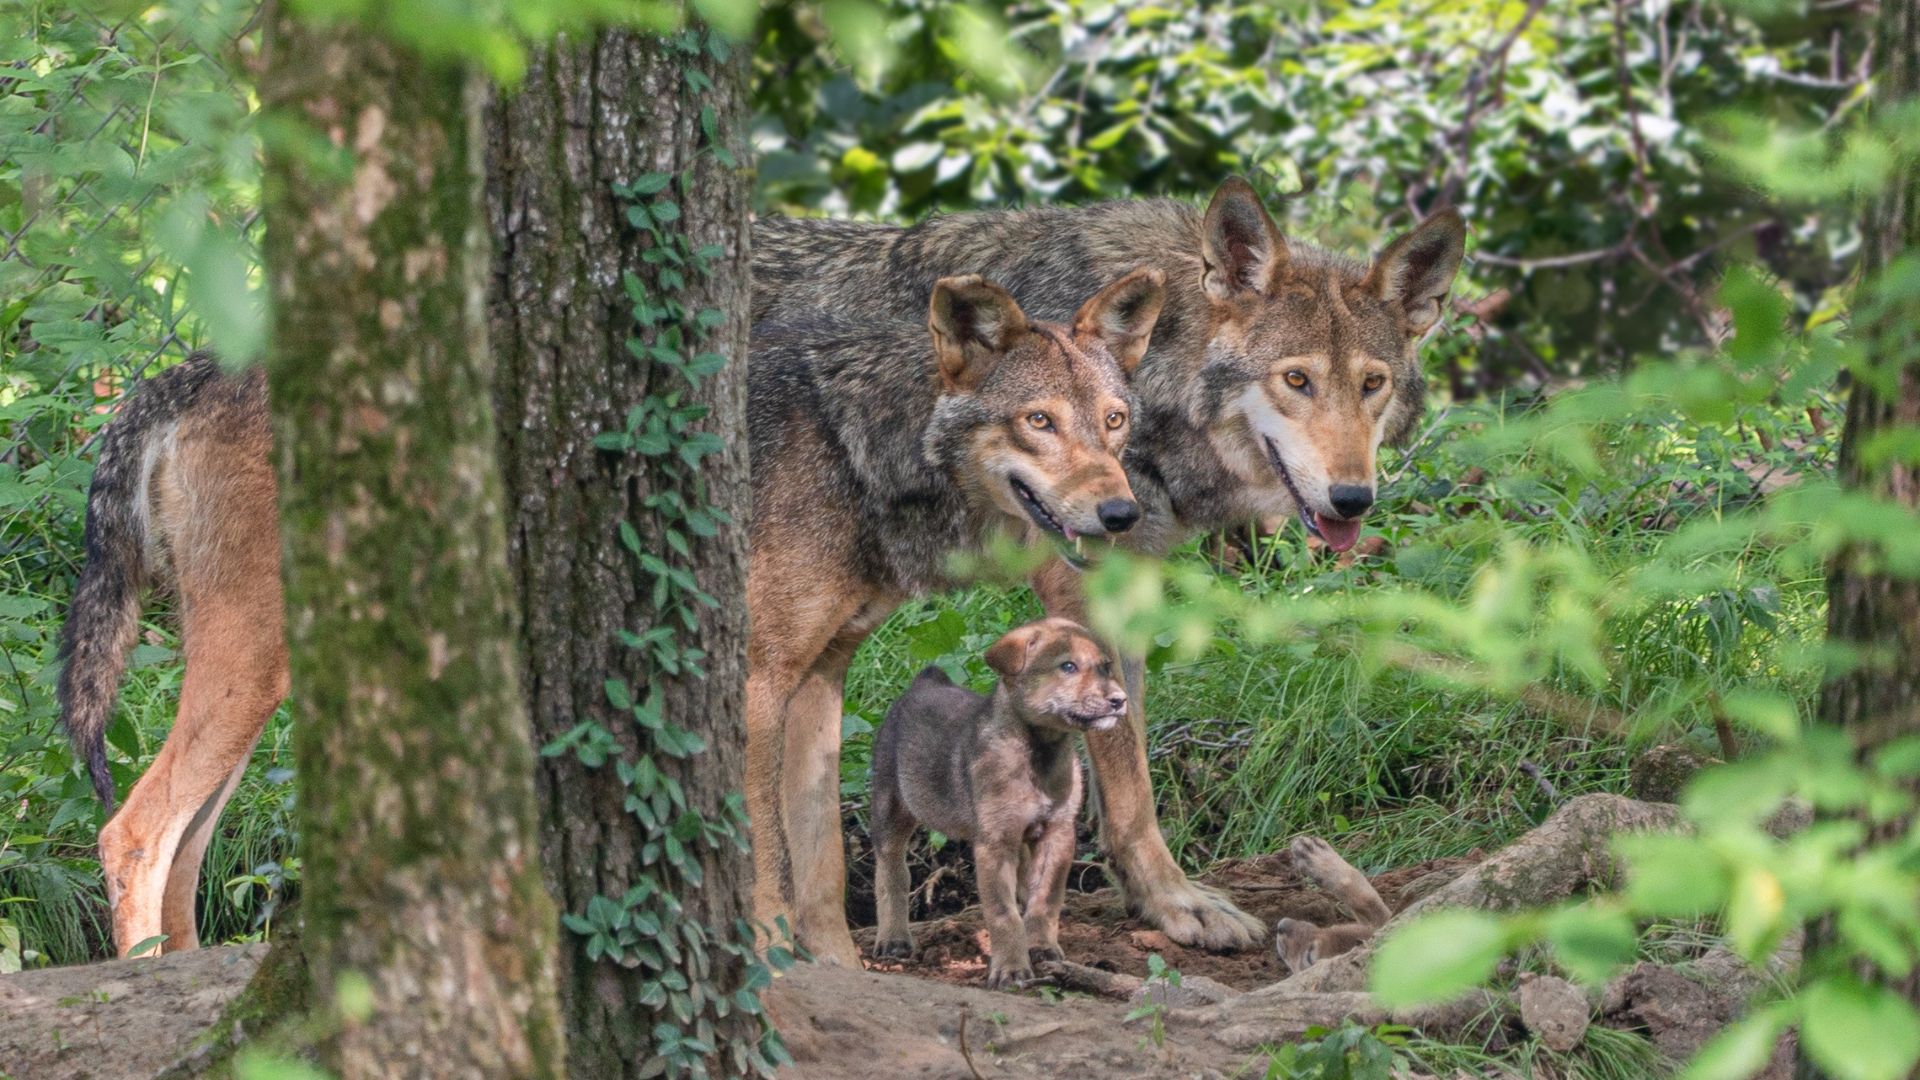 At the Endangered Wolf Center, kids, teenagers and adults can spot American red wolves.